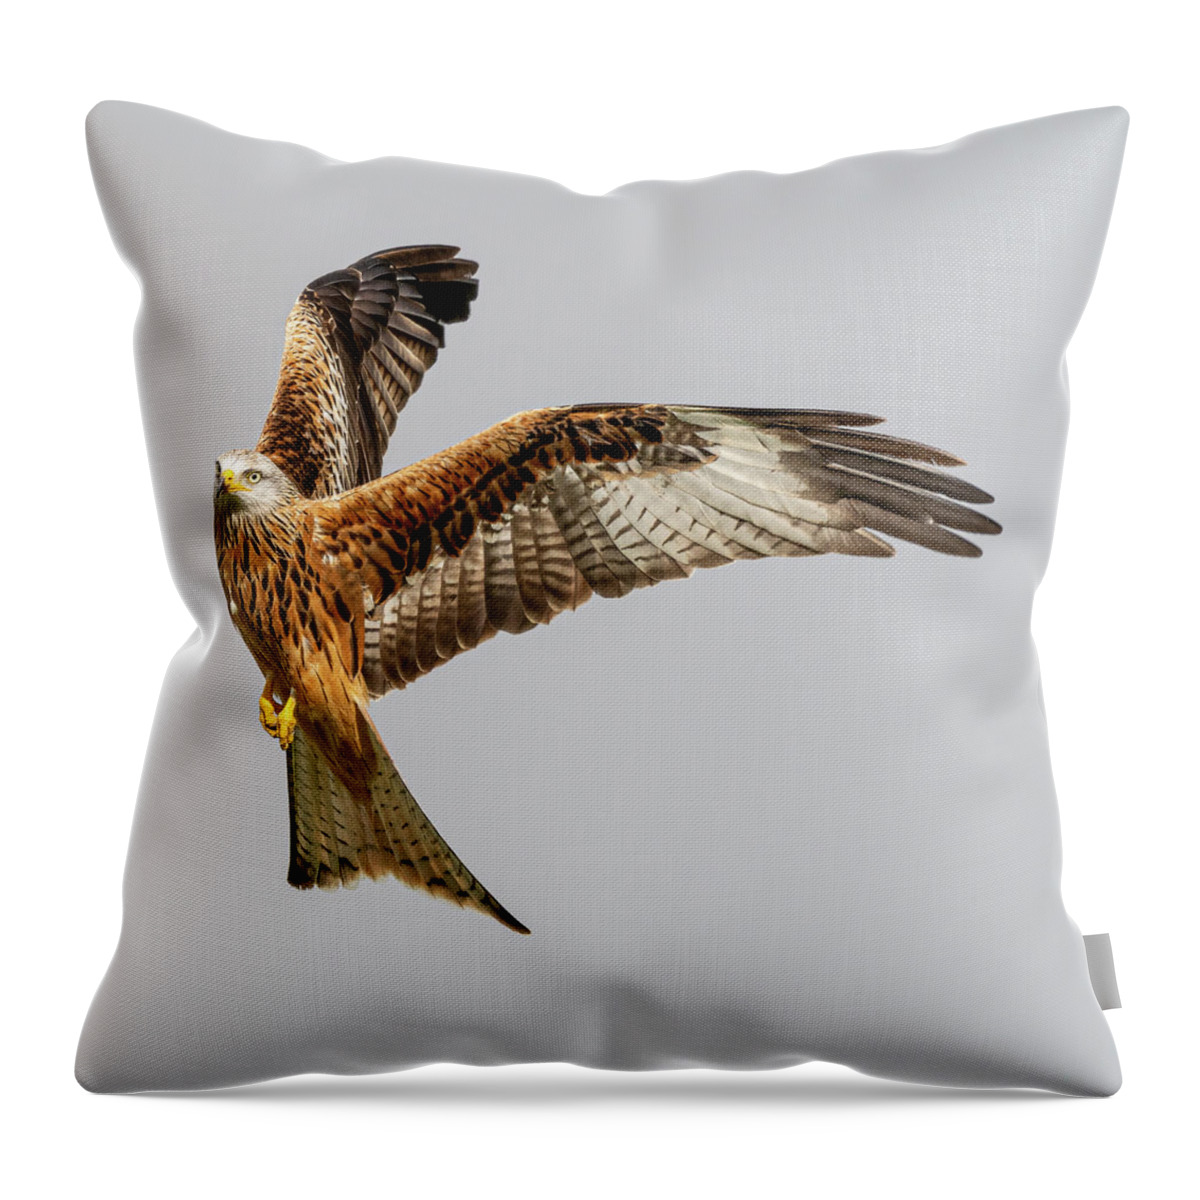 Red Kite Throw Pillow featuring the photograph Startled Red Kite by Mark Hunter